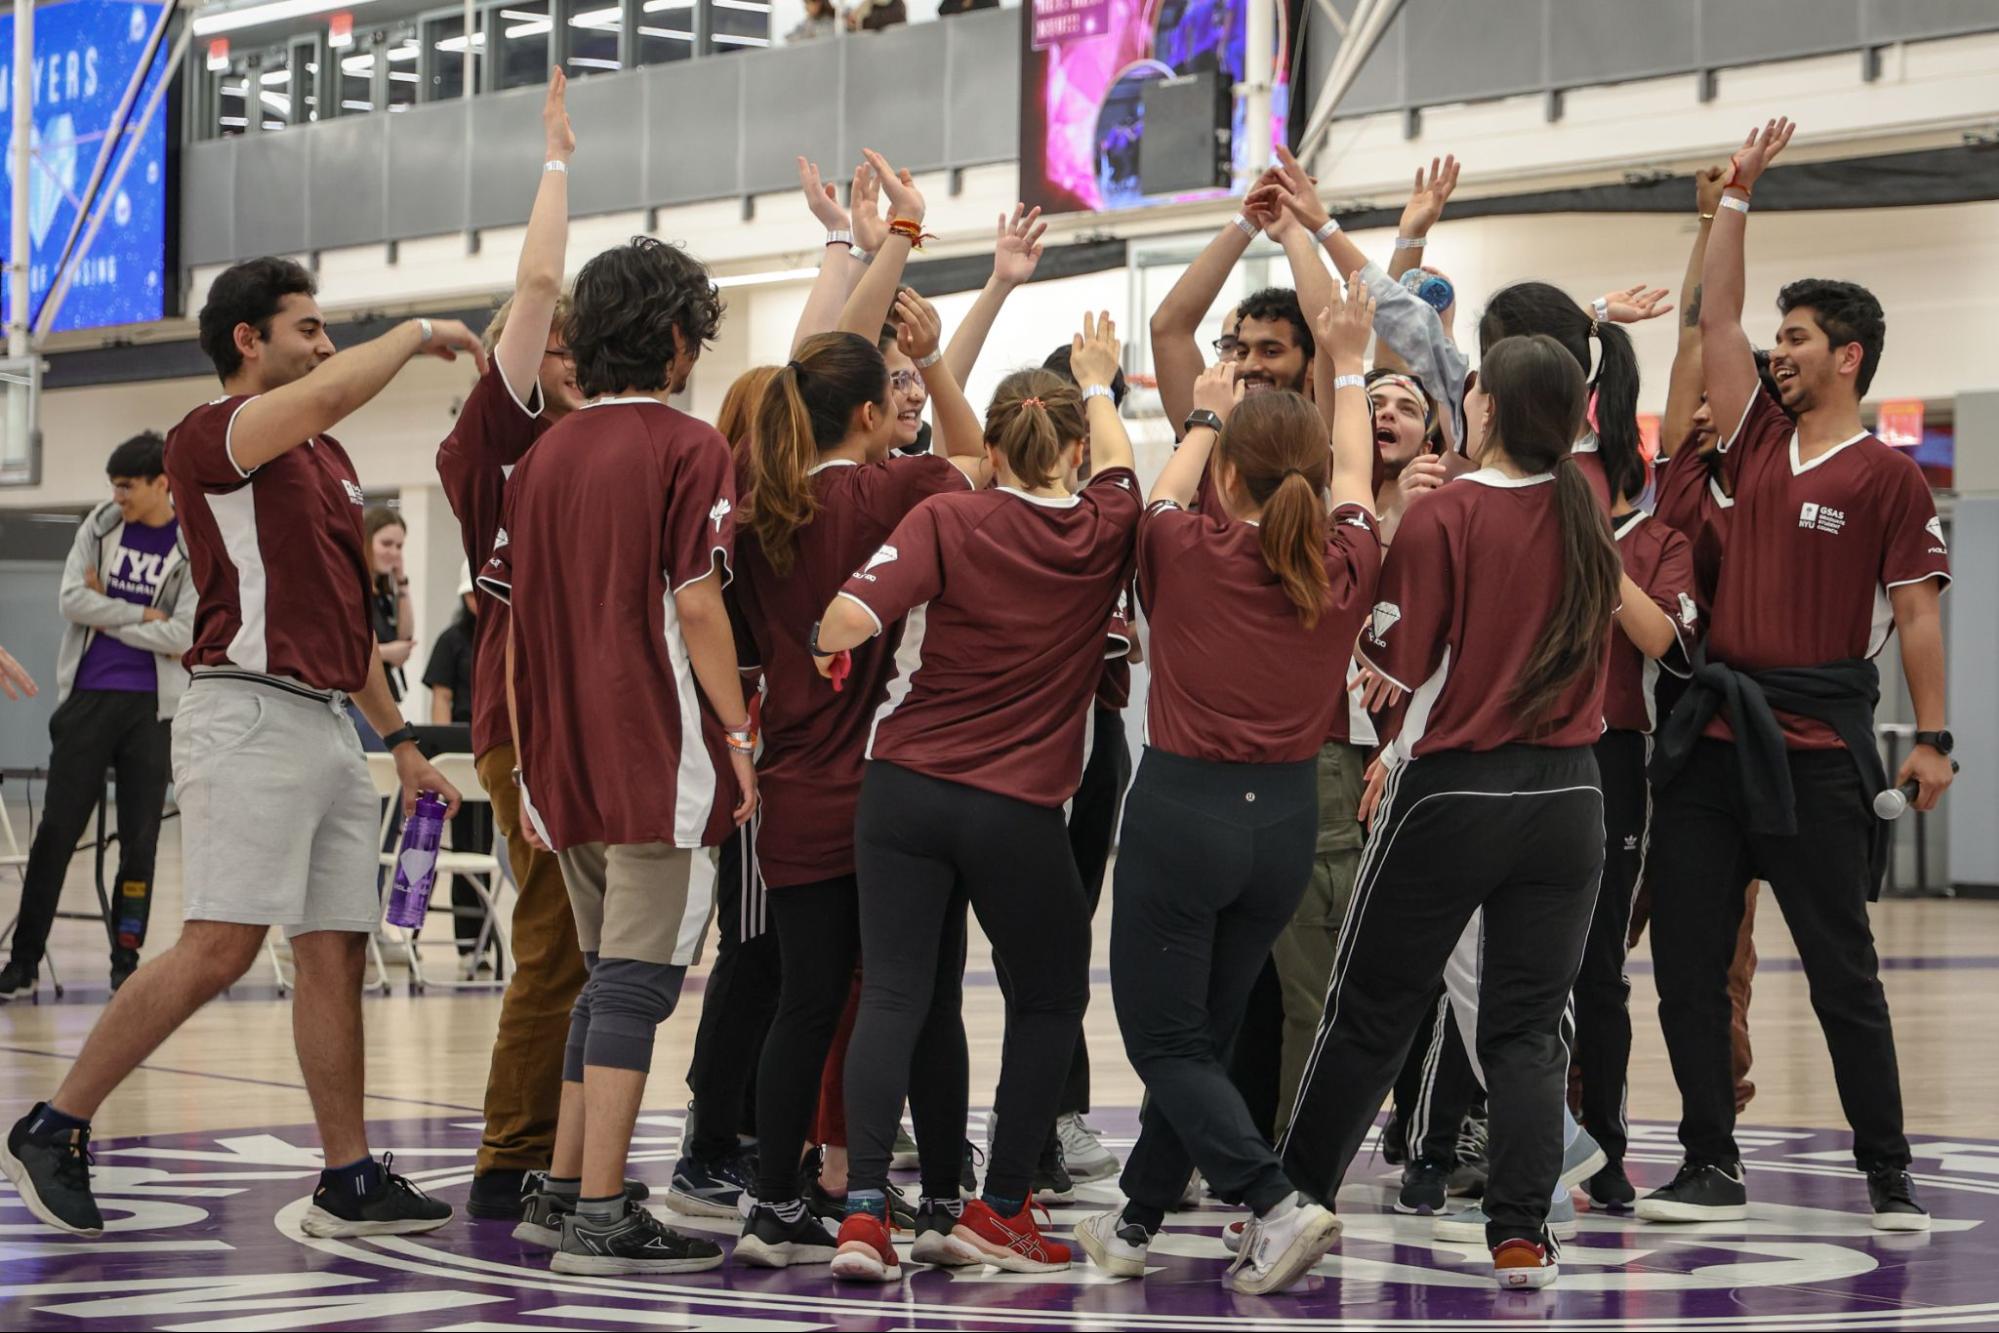 A team in maroon shirts stand in a circle with their hands raised. Their shirts say in white font “G.S.A.S.” along with the N.Y.U. torch logo.